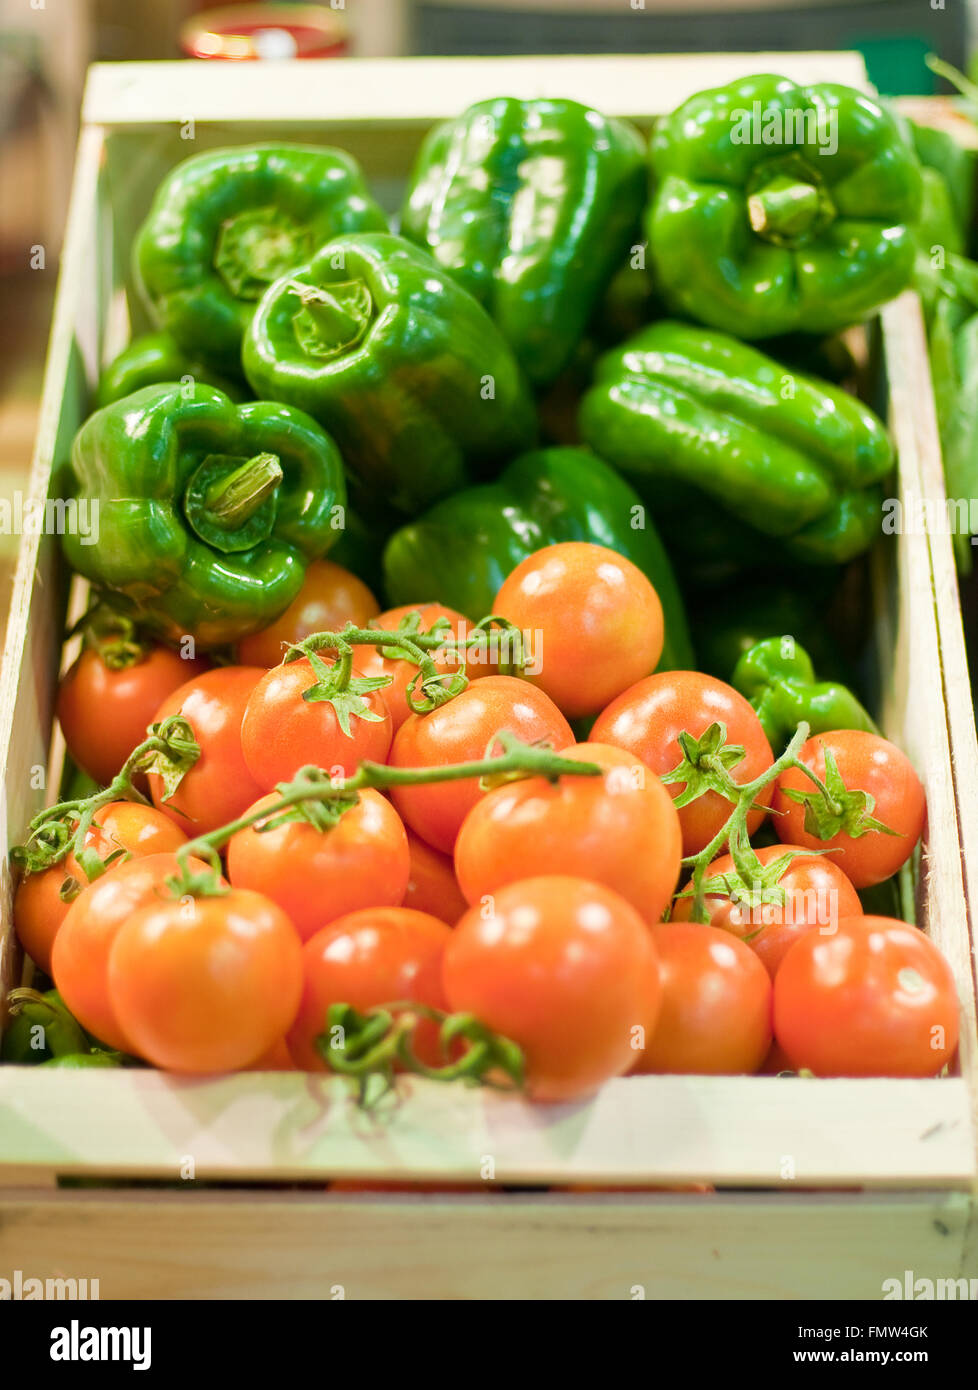 wooden box containing tomatoes and green peppers,fruit Stock Photo